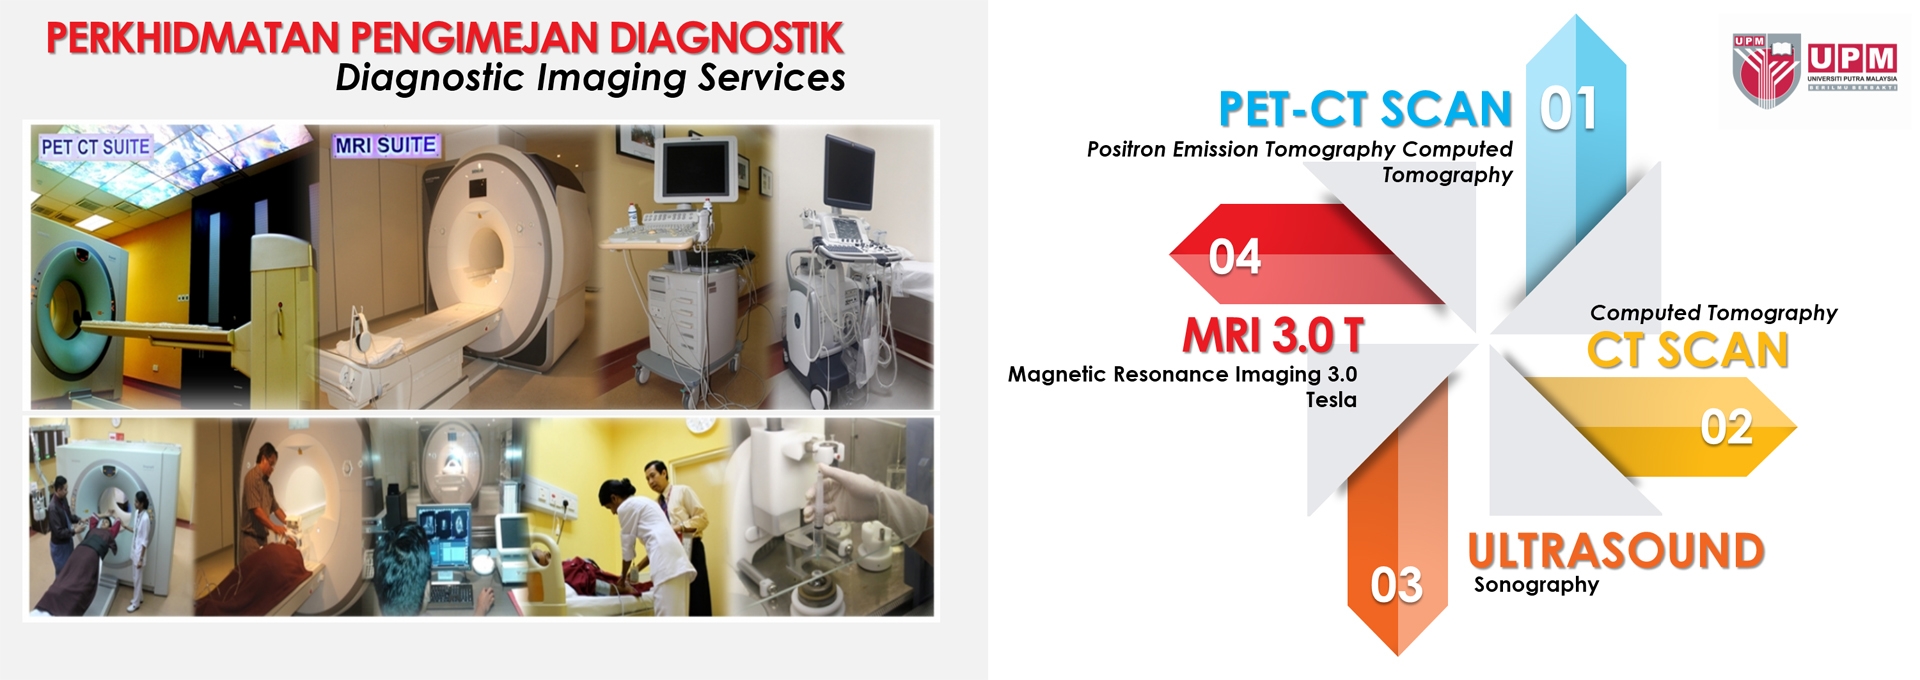 We provided the services of MRI, PET/CT, CT and Ultrasound